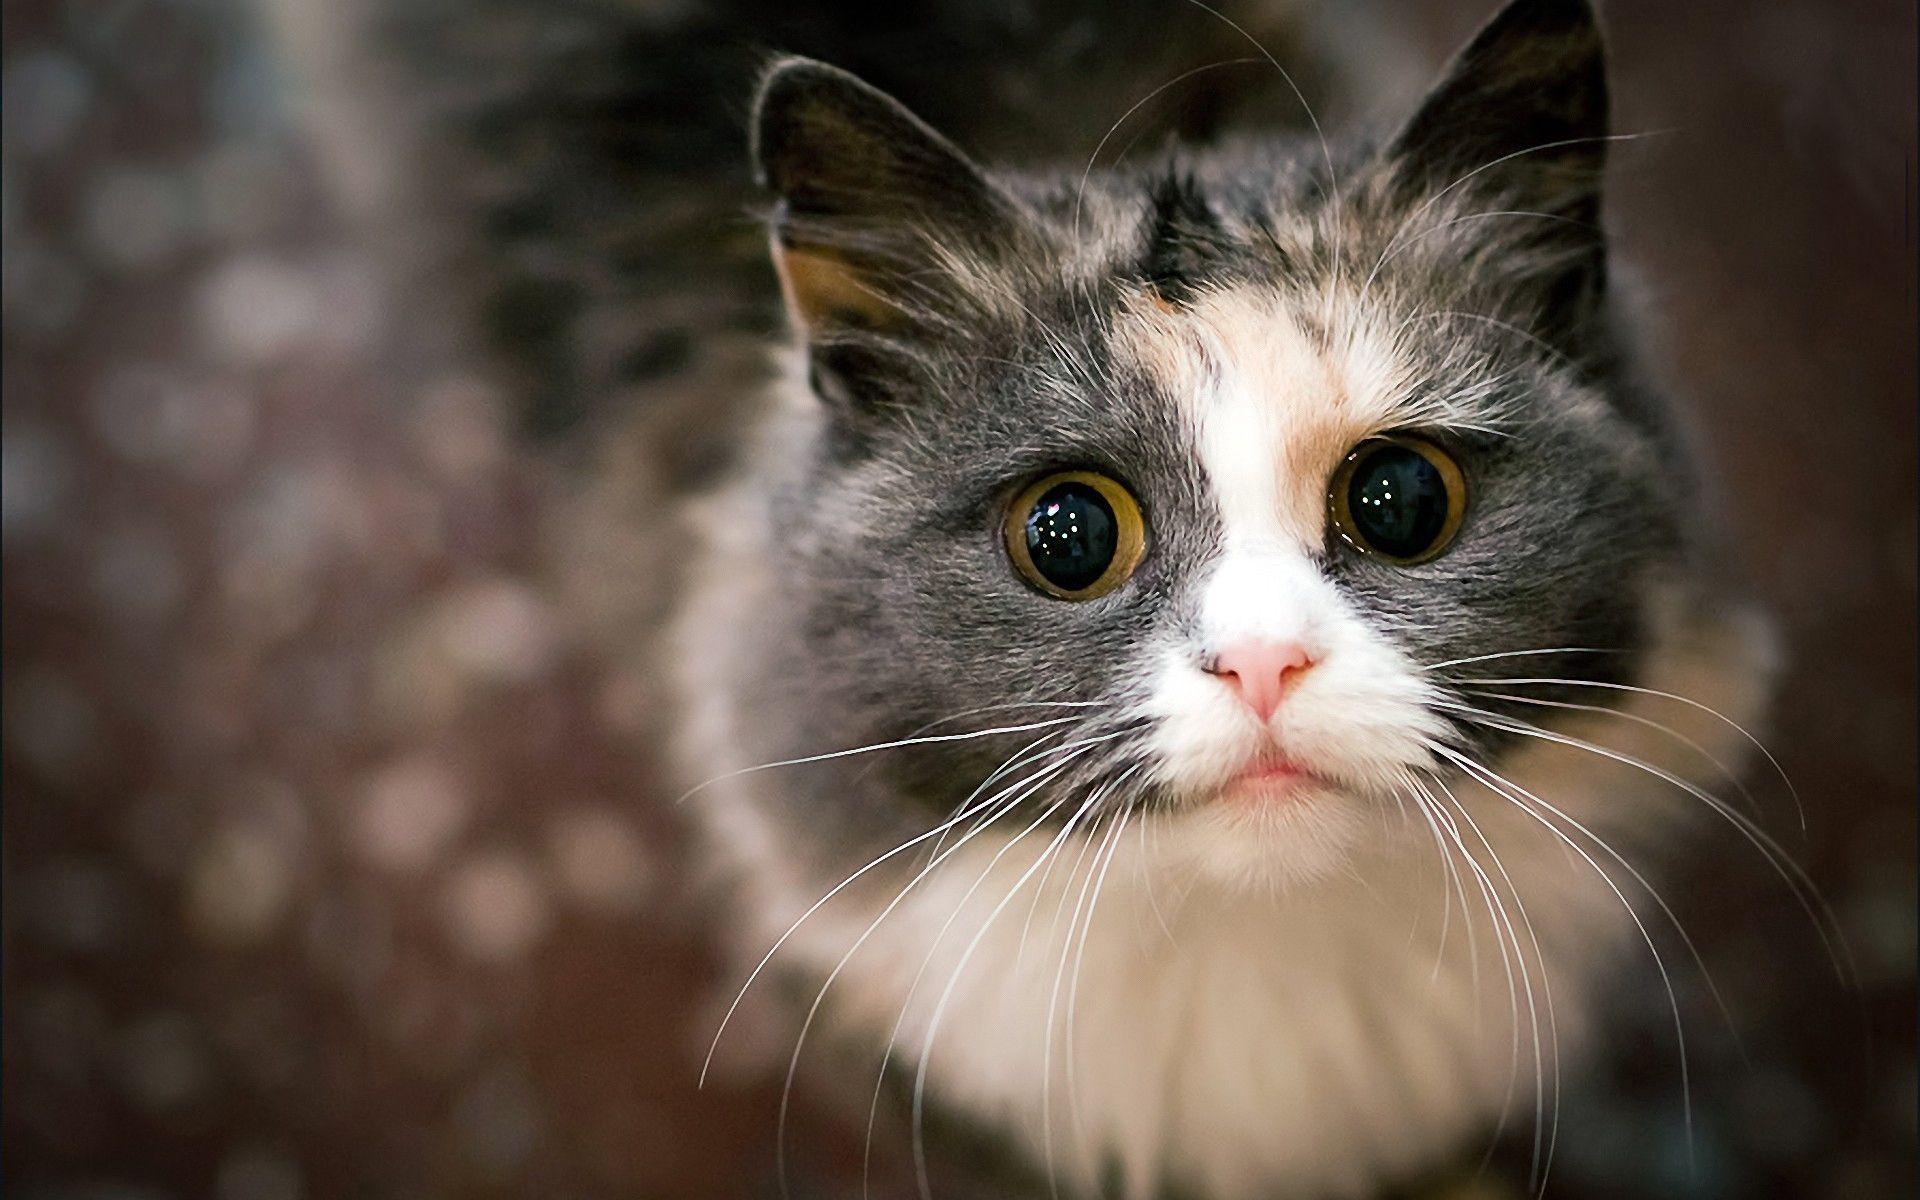 Scared cat with huge eyes wallpaper and image